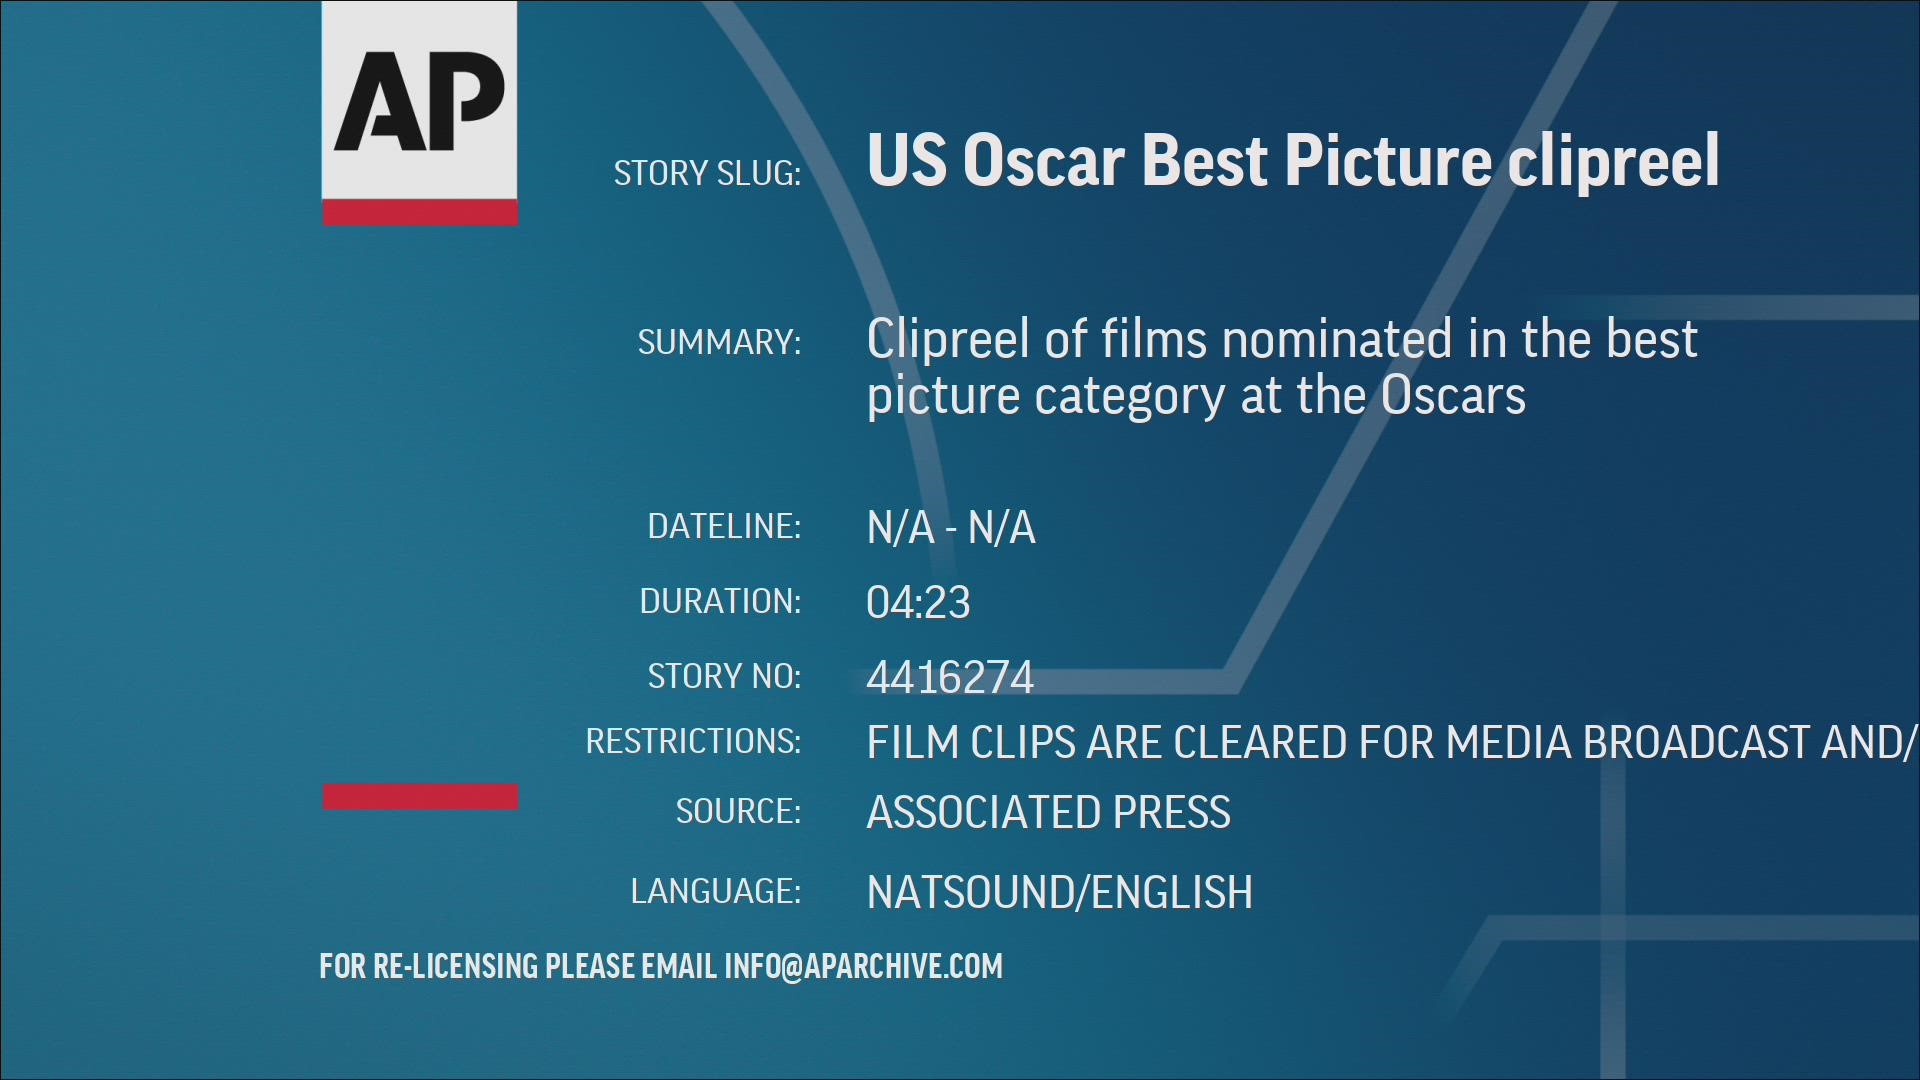 Video is a clip reel for 10 'Best Picture' film nominations. Video is from AP.